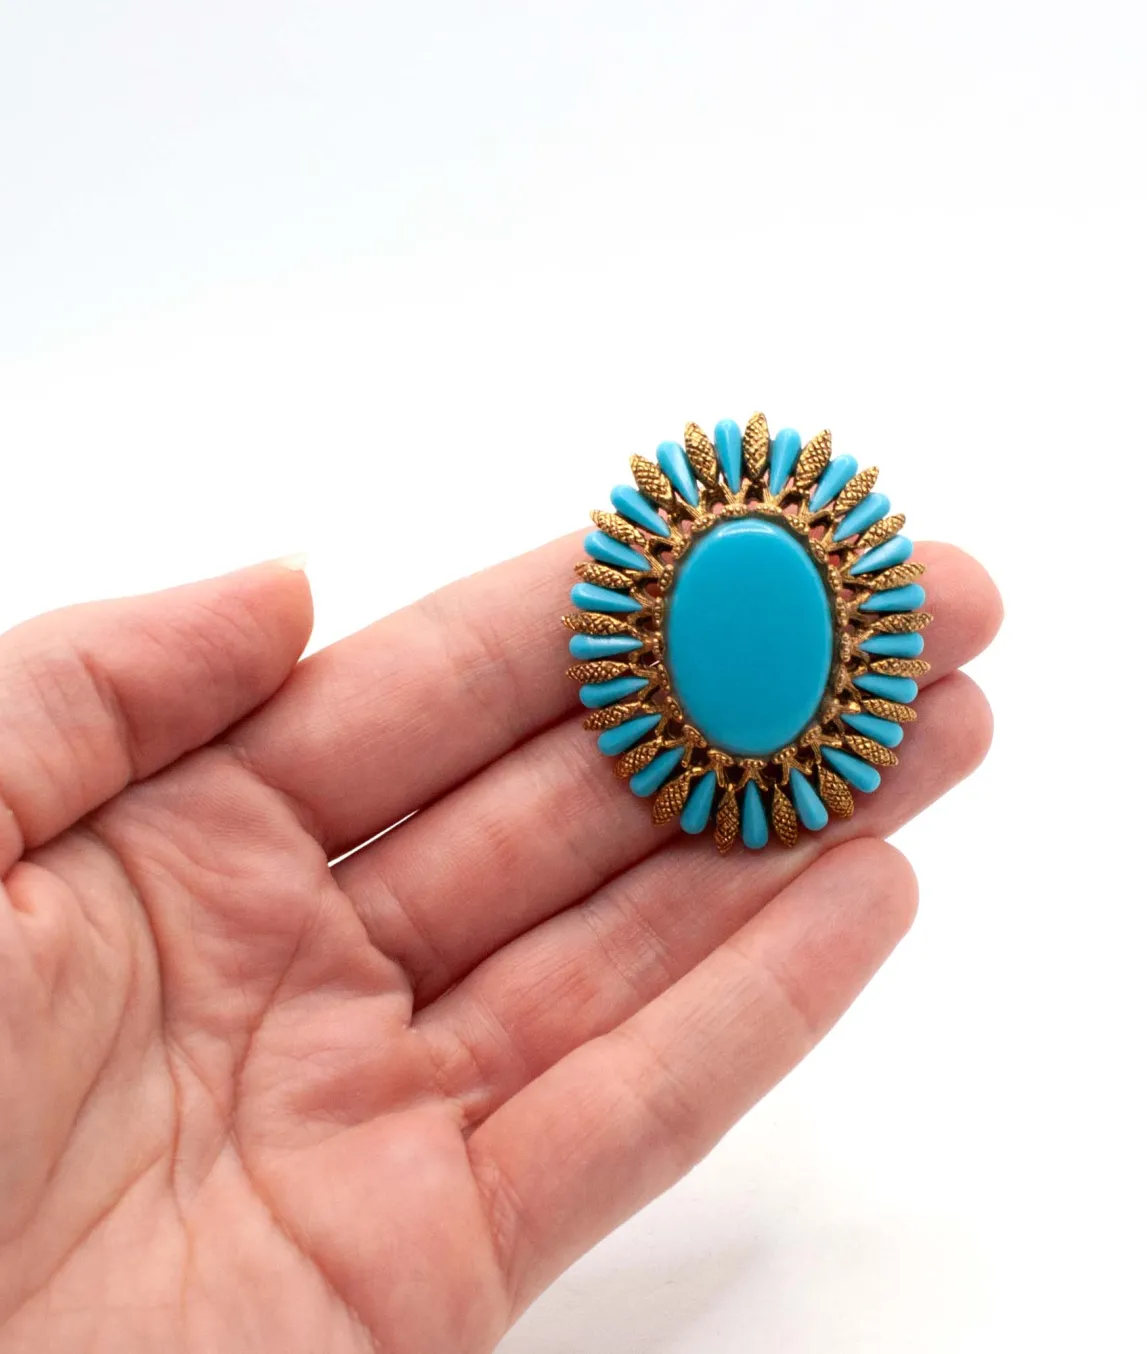 Vintage oval shaped turquoise glass brooch by HAR held in hand